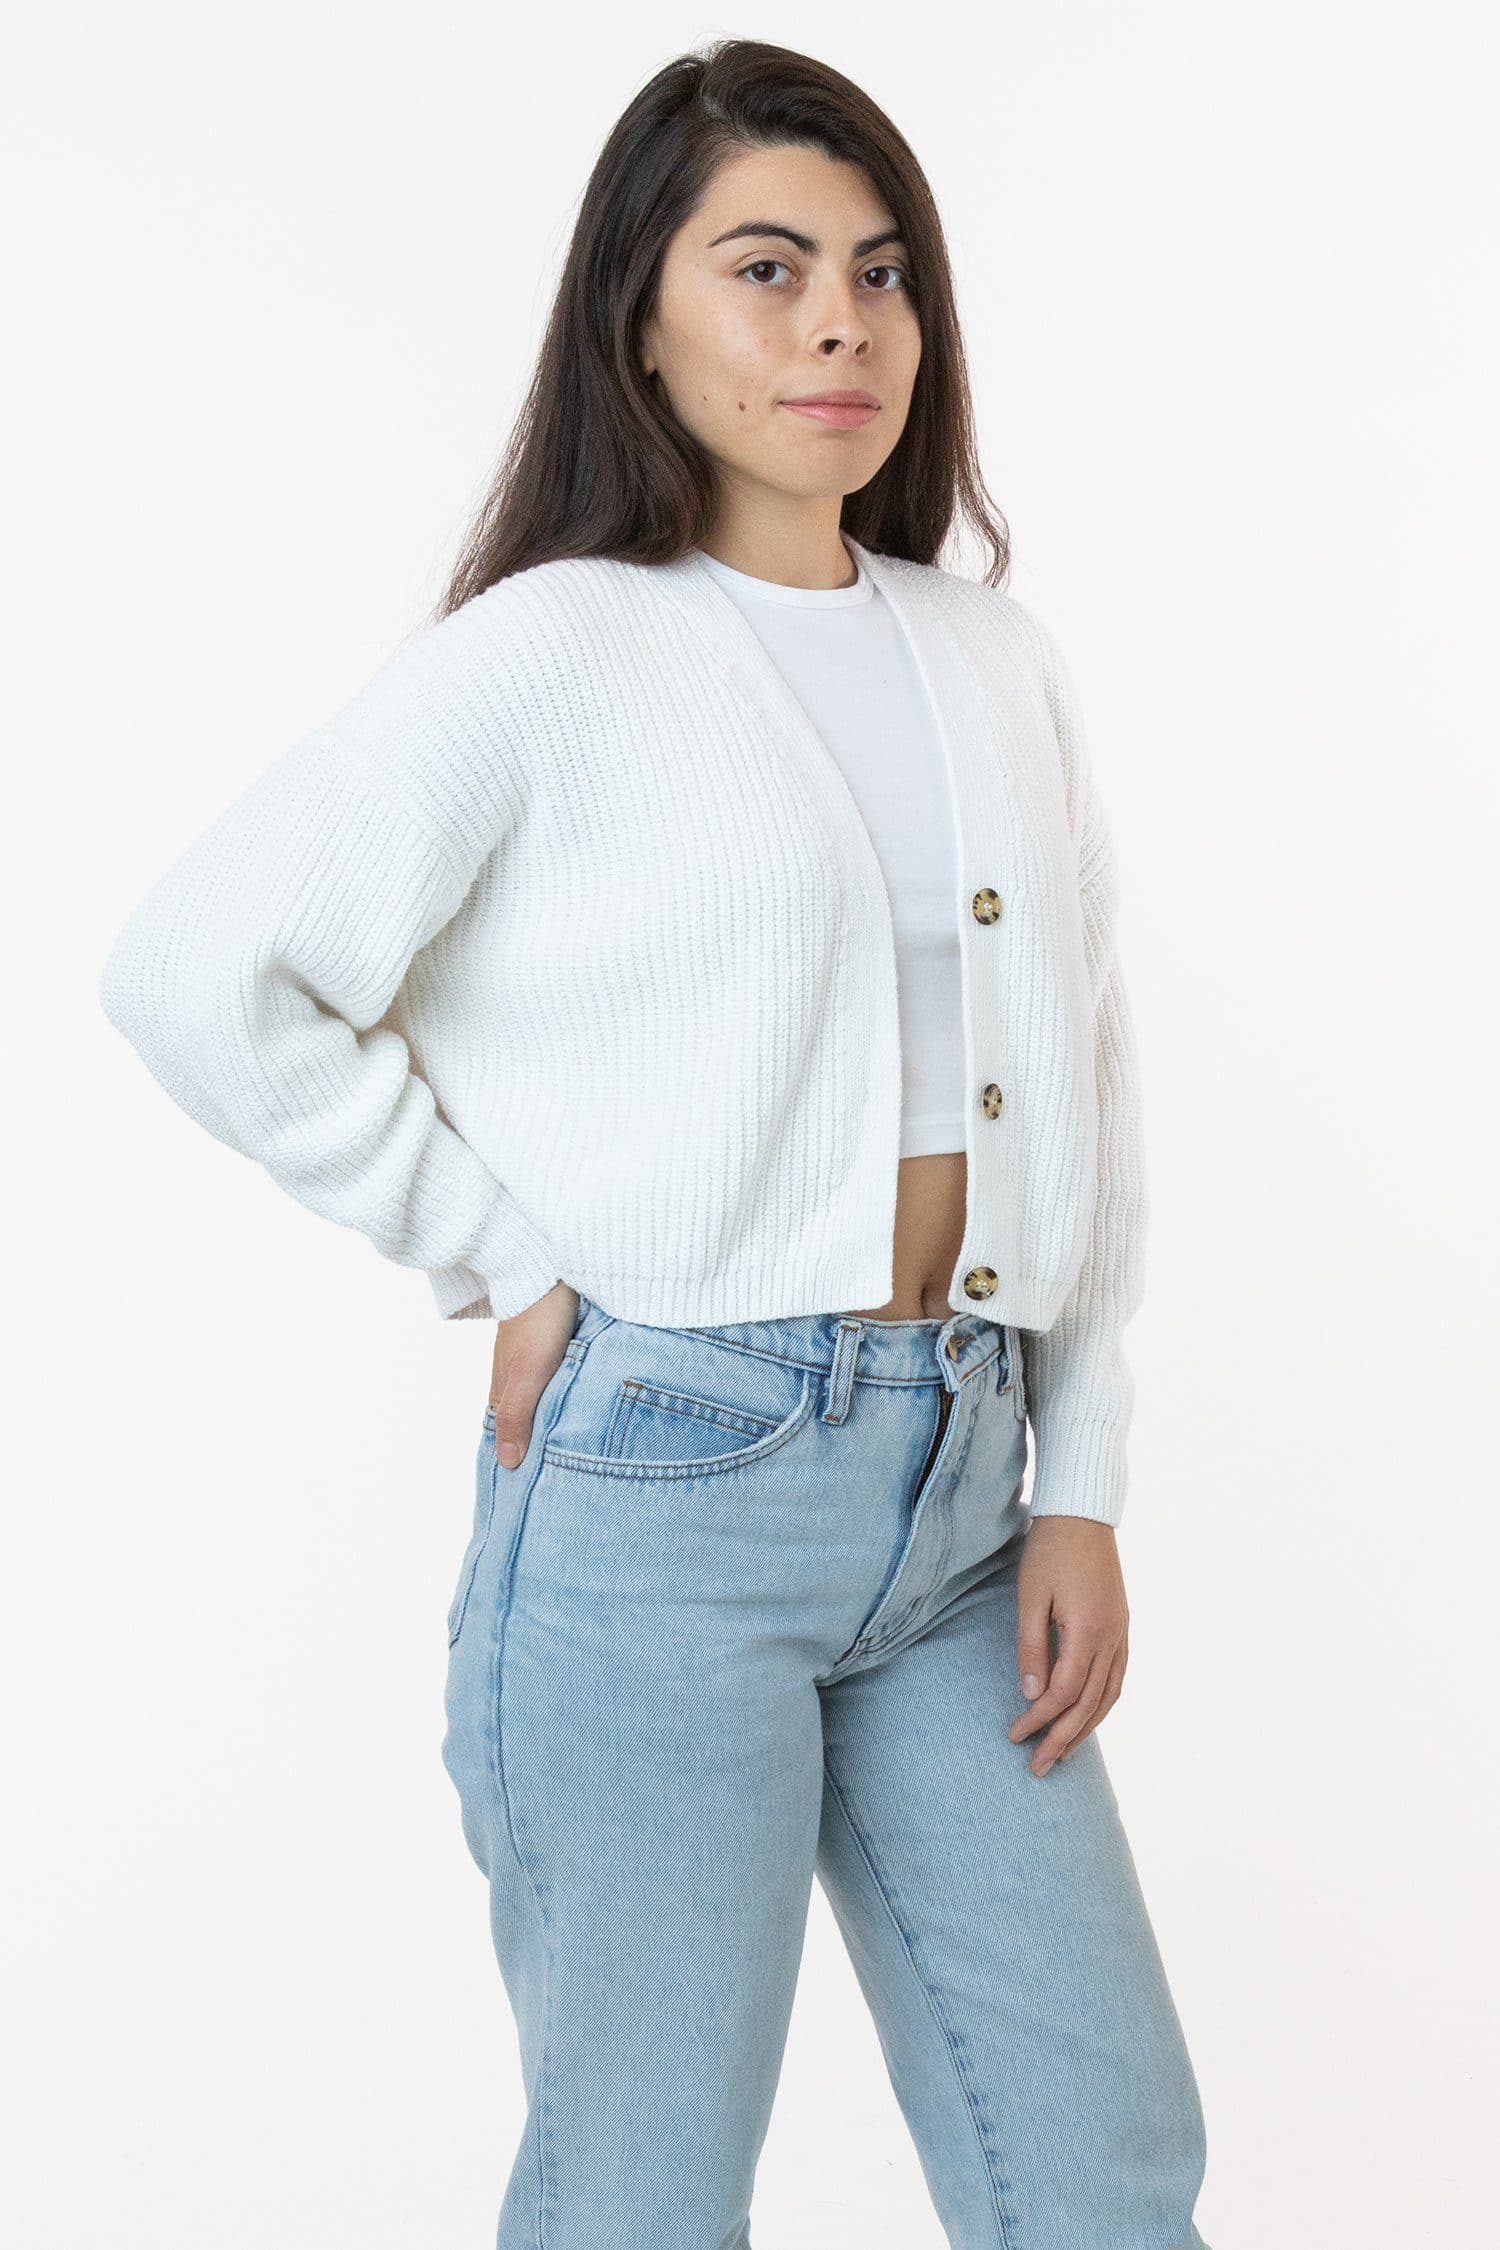 How to wear Cropped Sweaters like a Fashionista? – Onpost